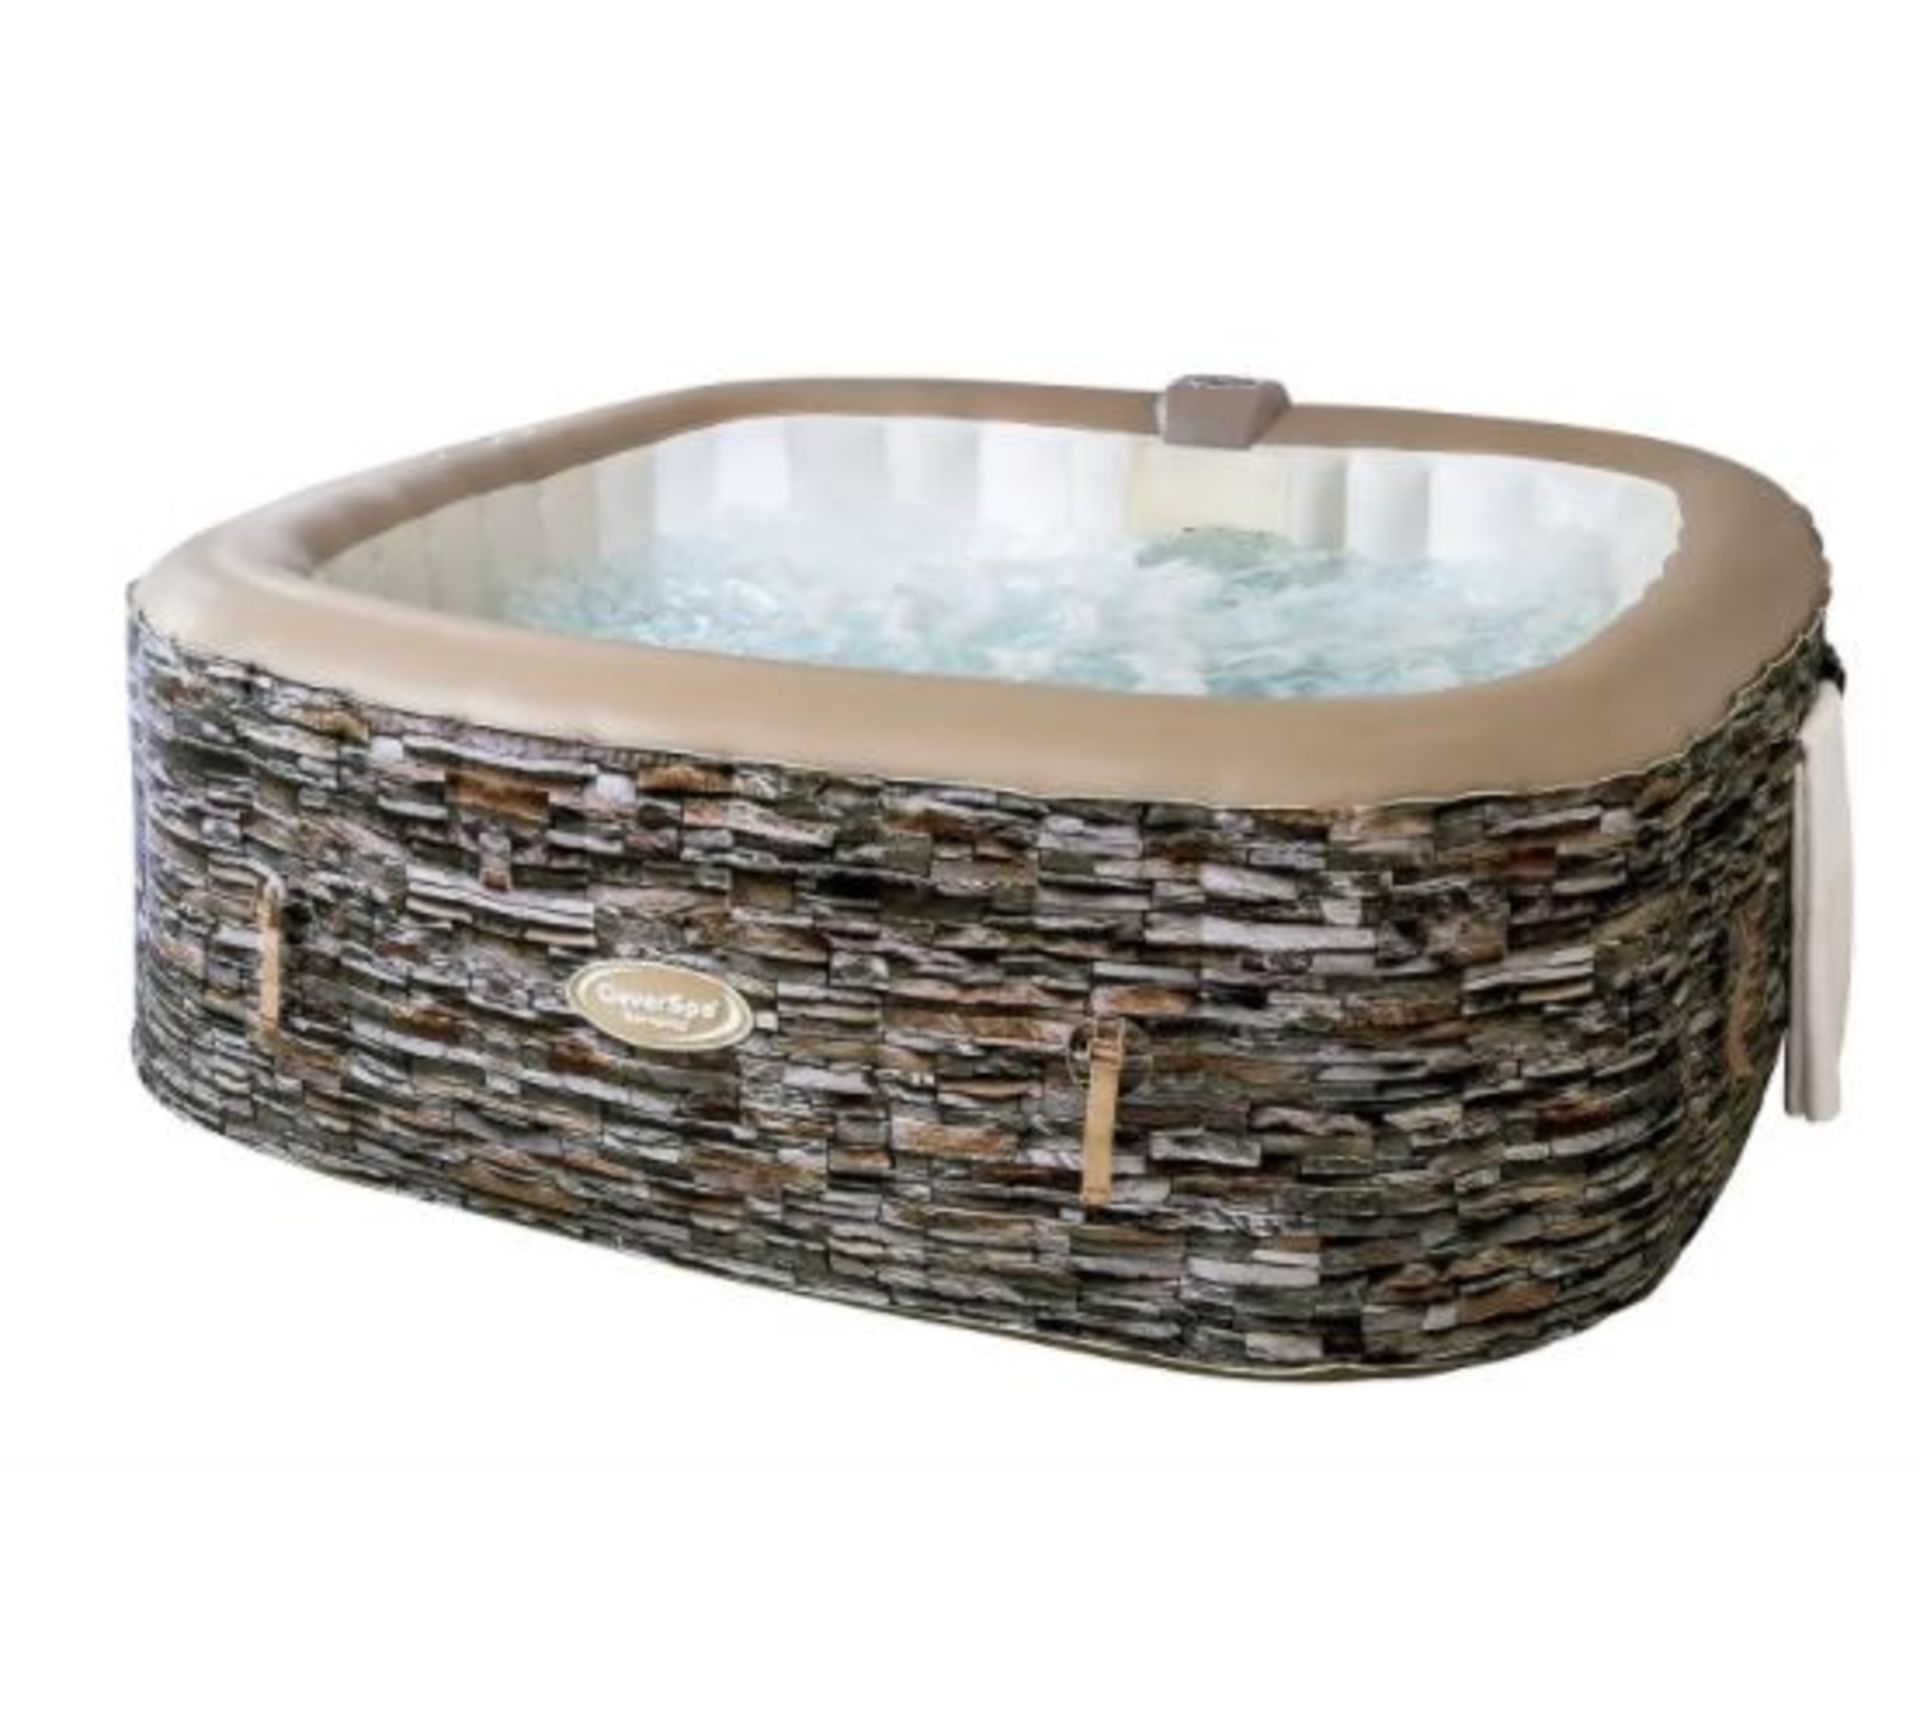 (R10K) 1x Cleverspa Sorrento 6 Person Hot Tub RRP £600. - Image 3 of 7